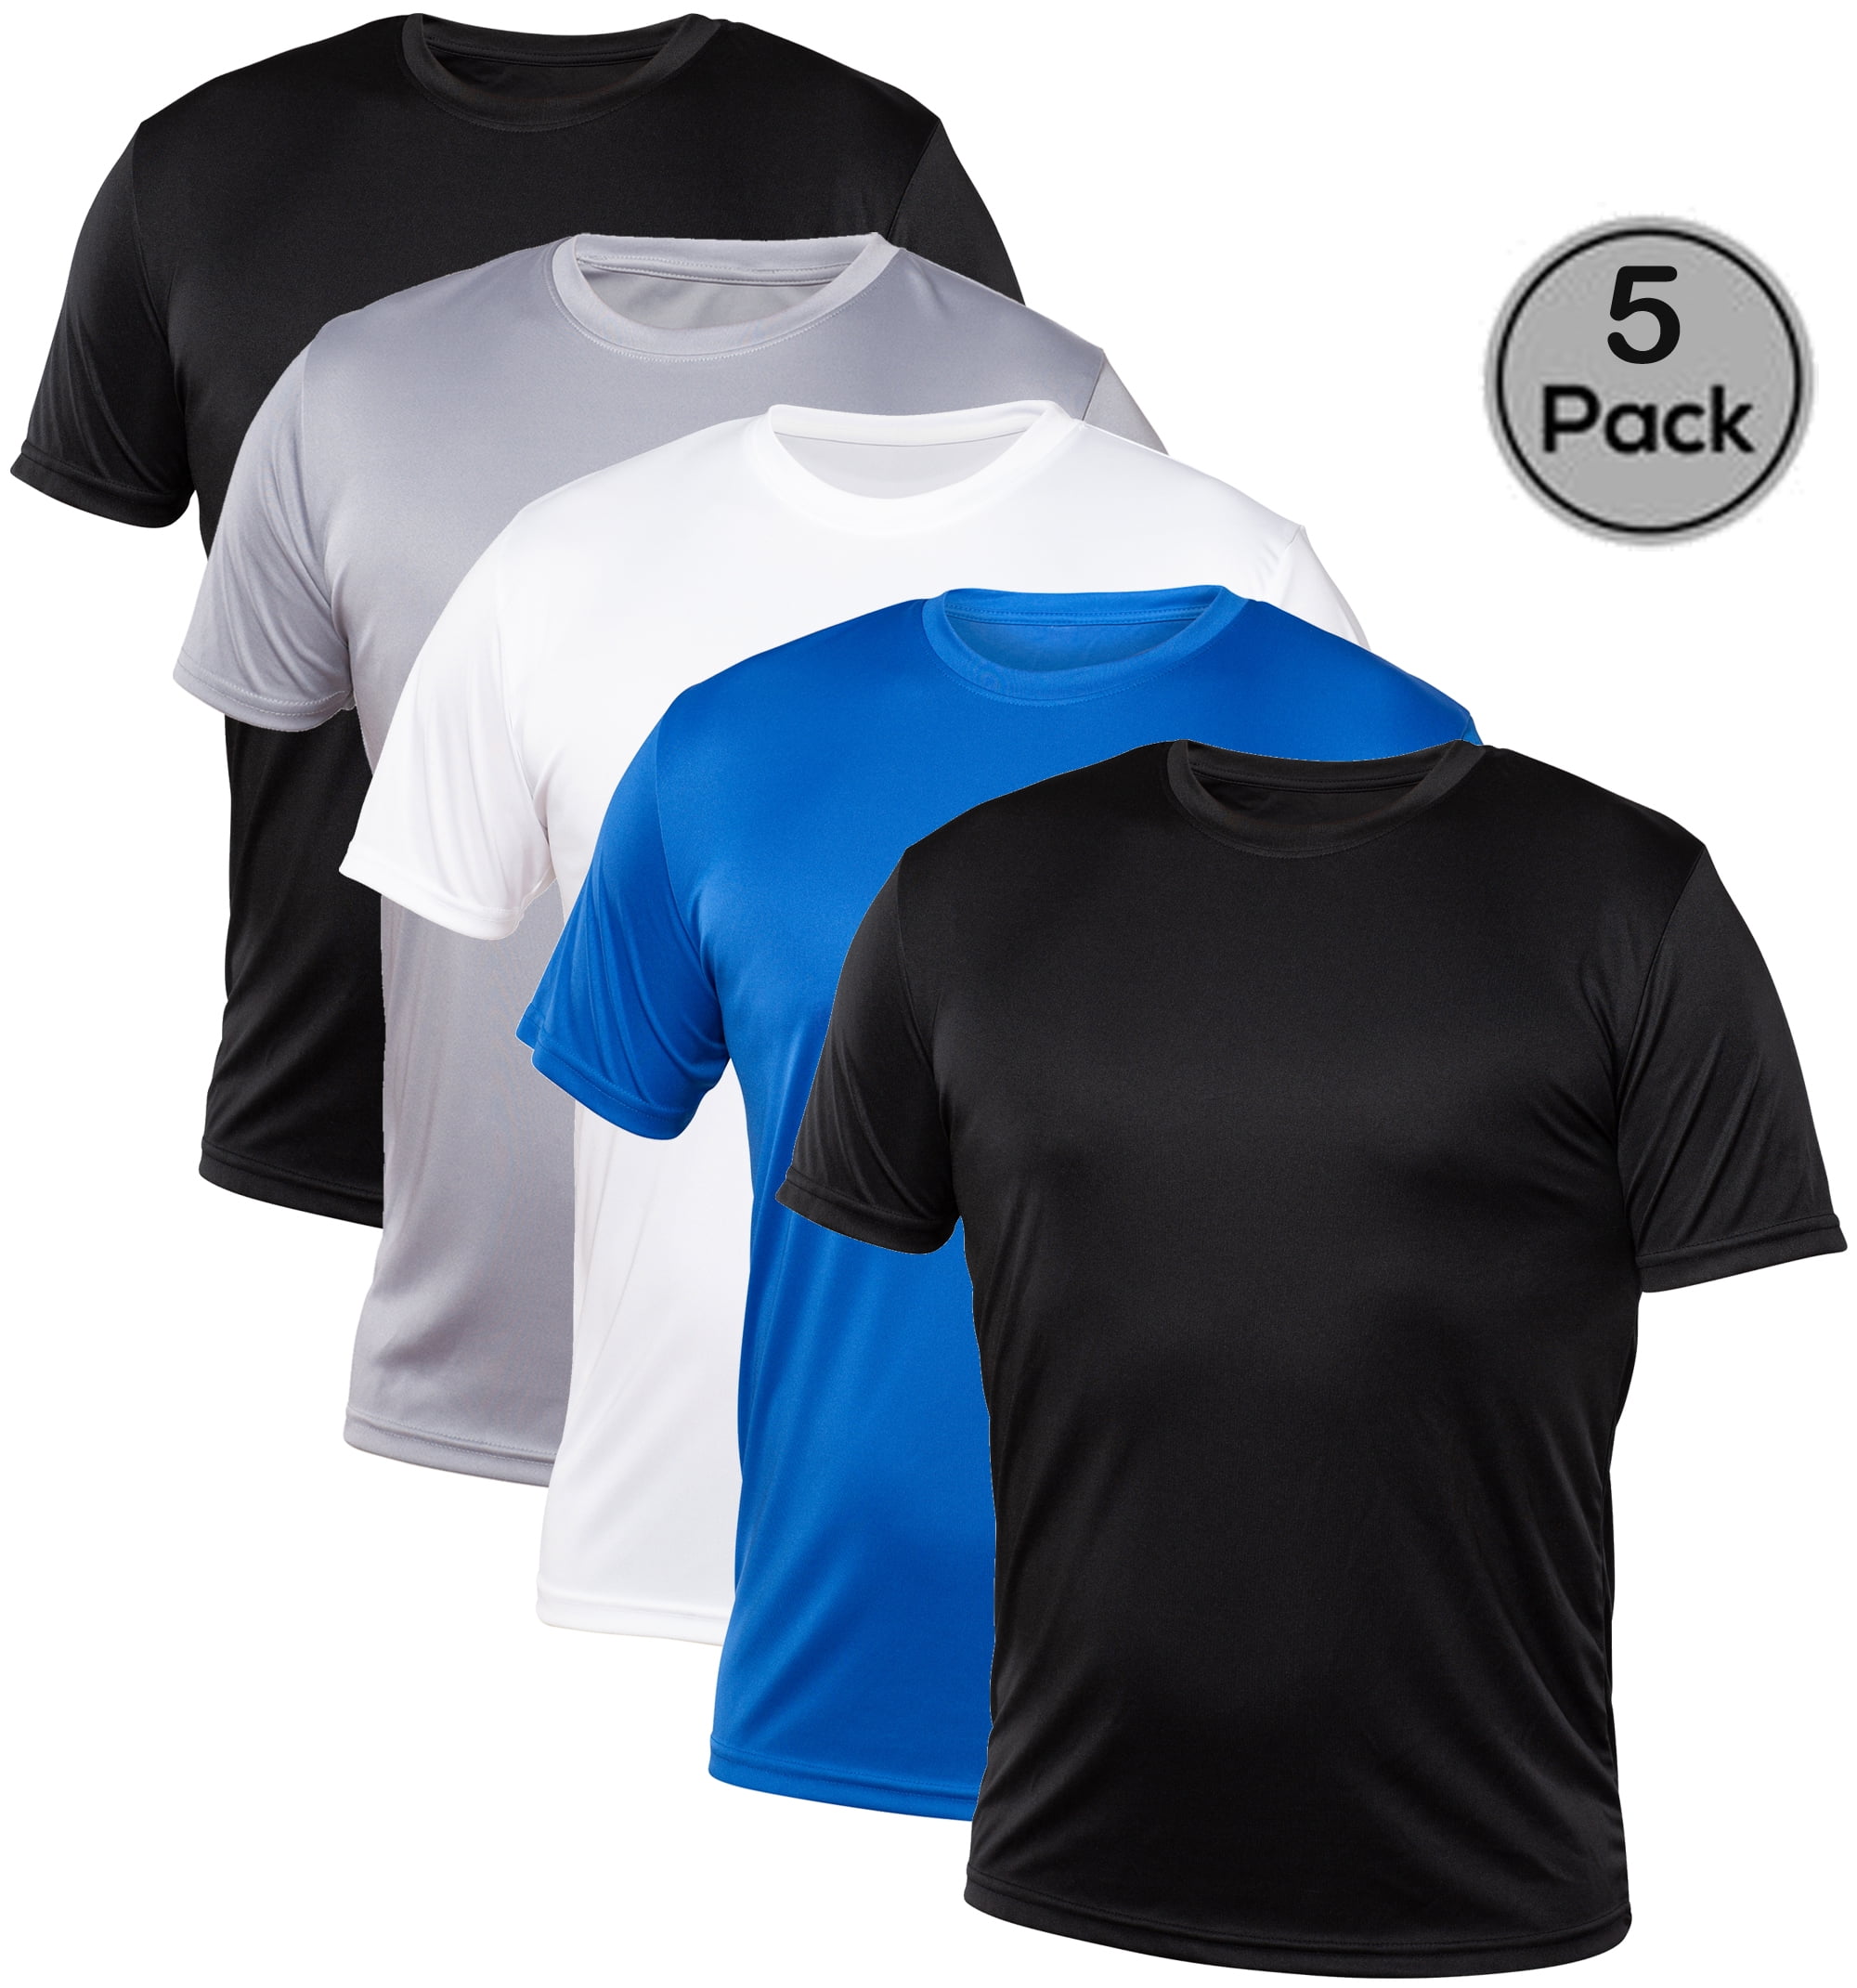 Blank Activewear, 5 Pack Men's Crew Neck Performance T-Shirt, XS to 4XL 